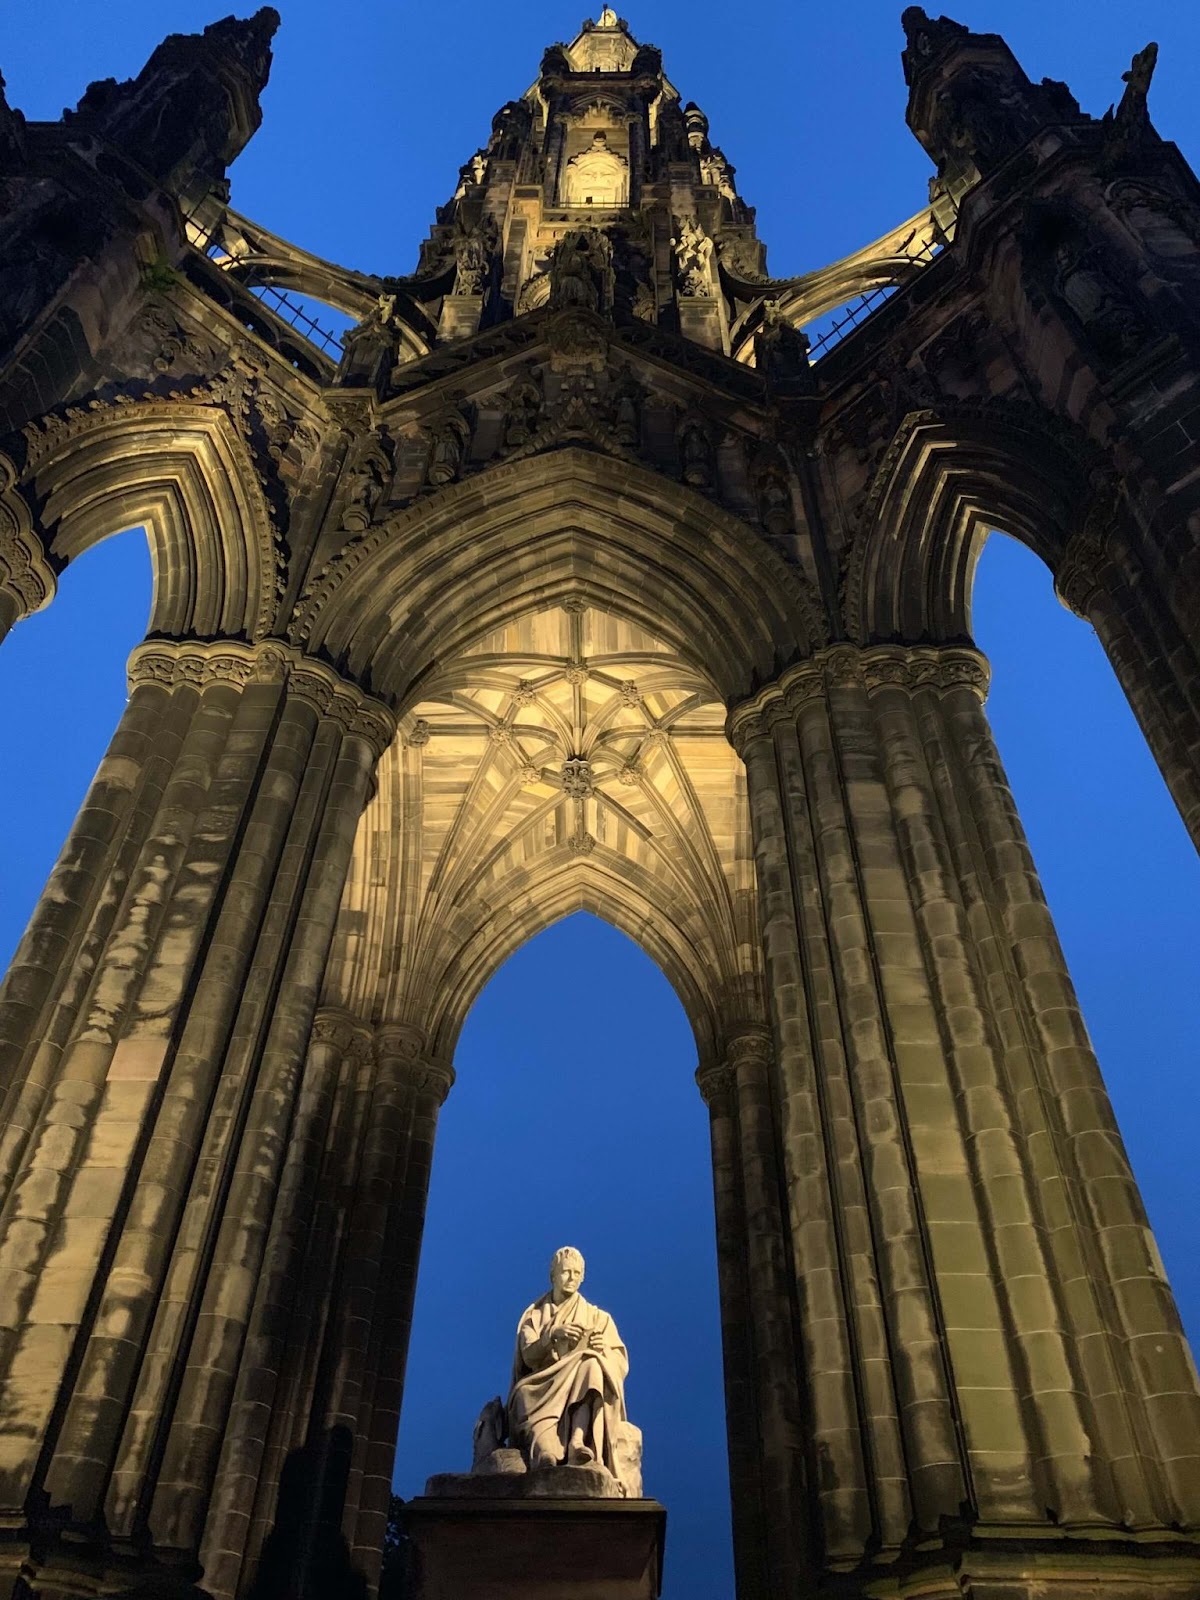 24 hours in Edinburgh. This is a bottom-up image of the Scott Monument with a view of Sir Walter Scott's statue.